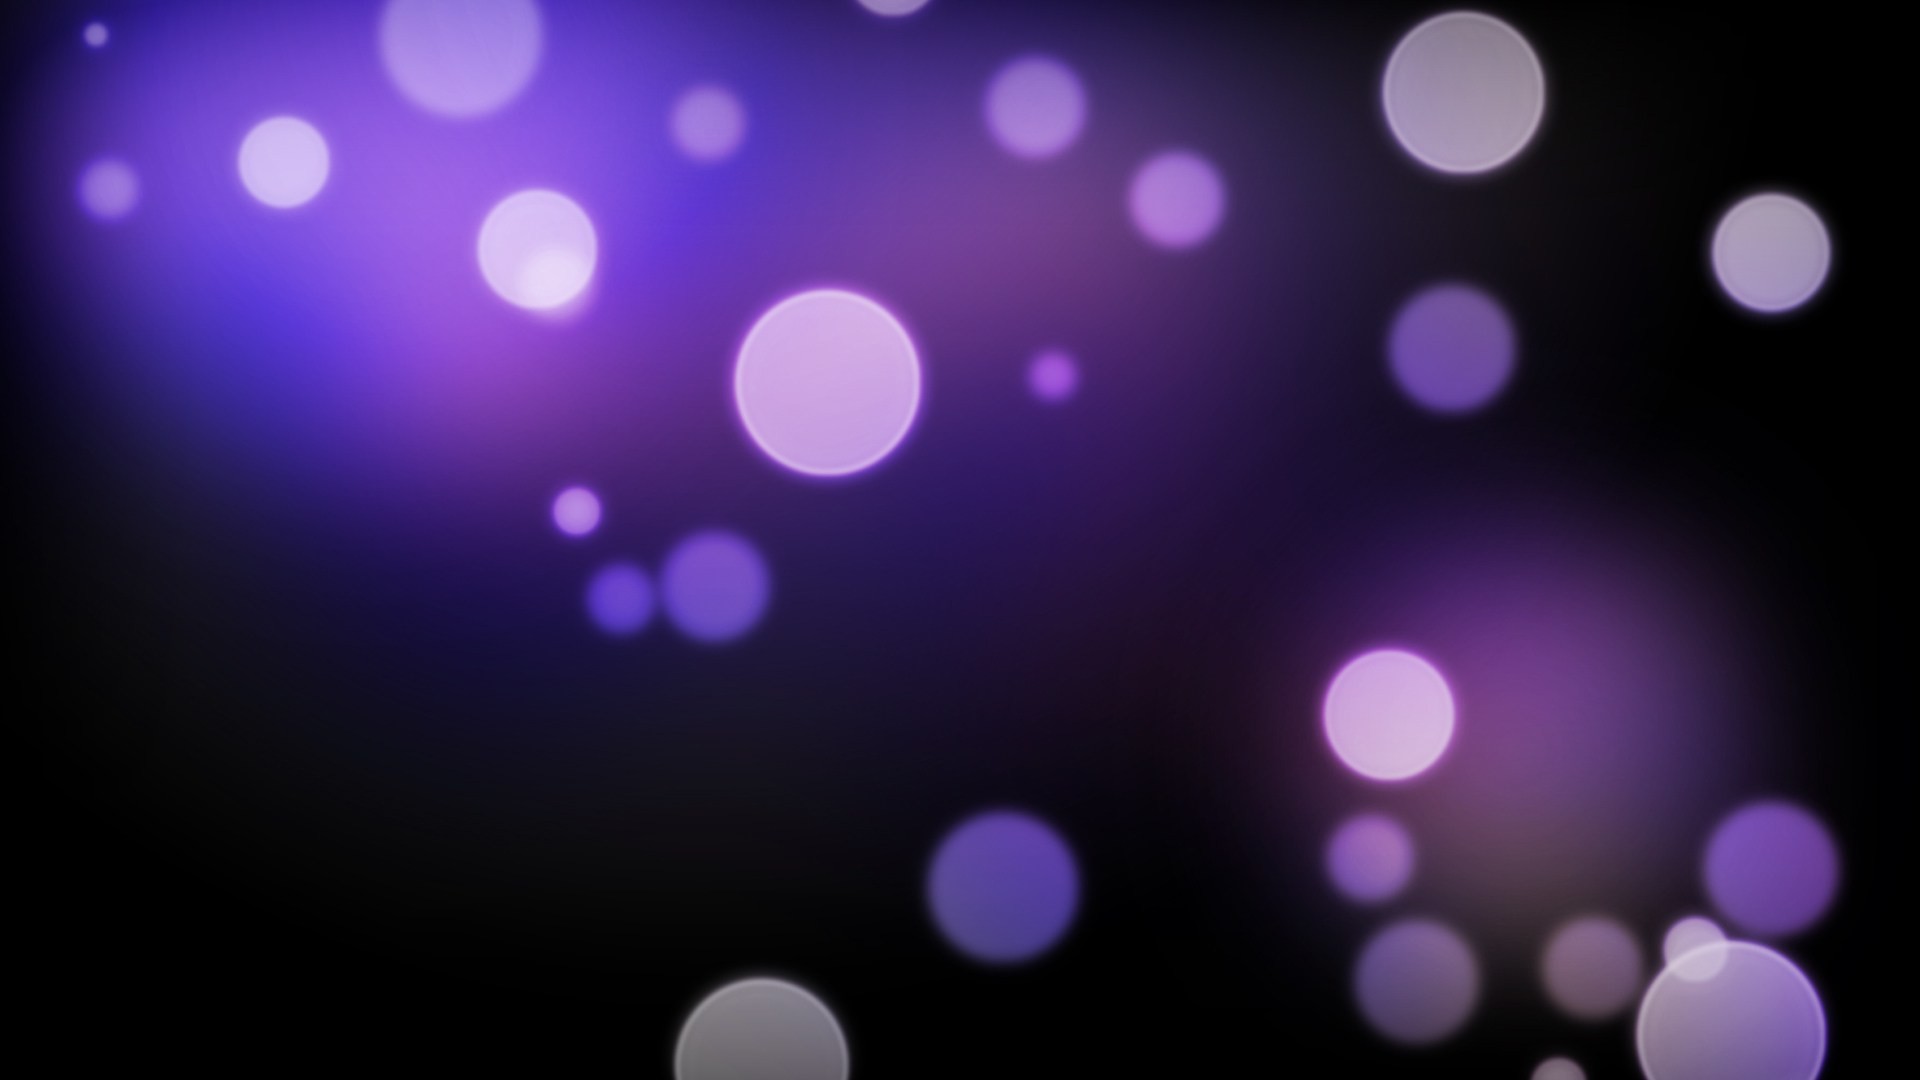 1920x1080 ... Awesome Cute Purple Backgrounds Wallpaper of awesome full screen HD  wallpapers to download for free.